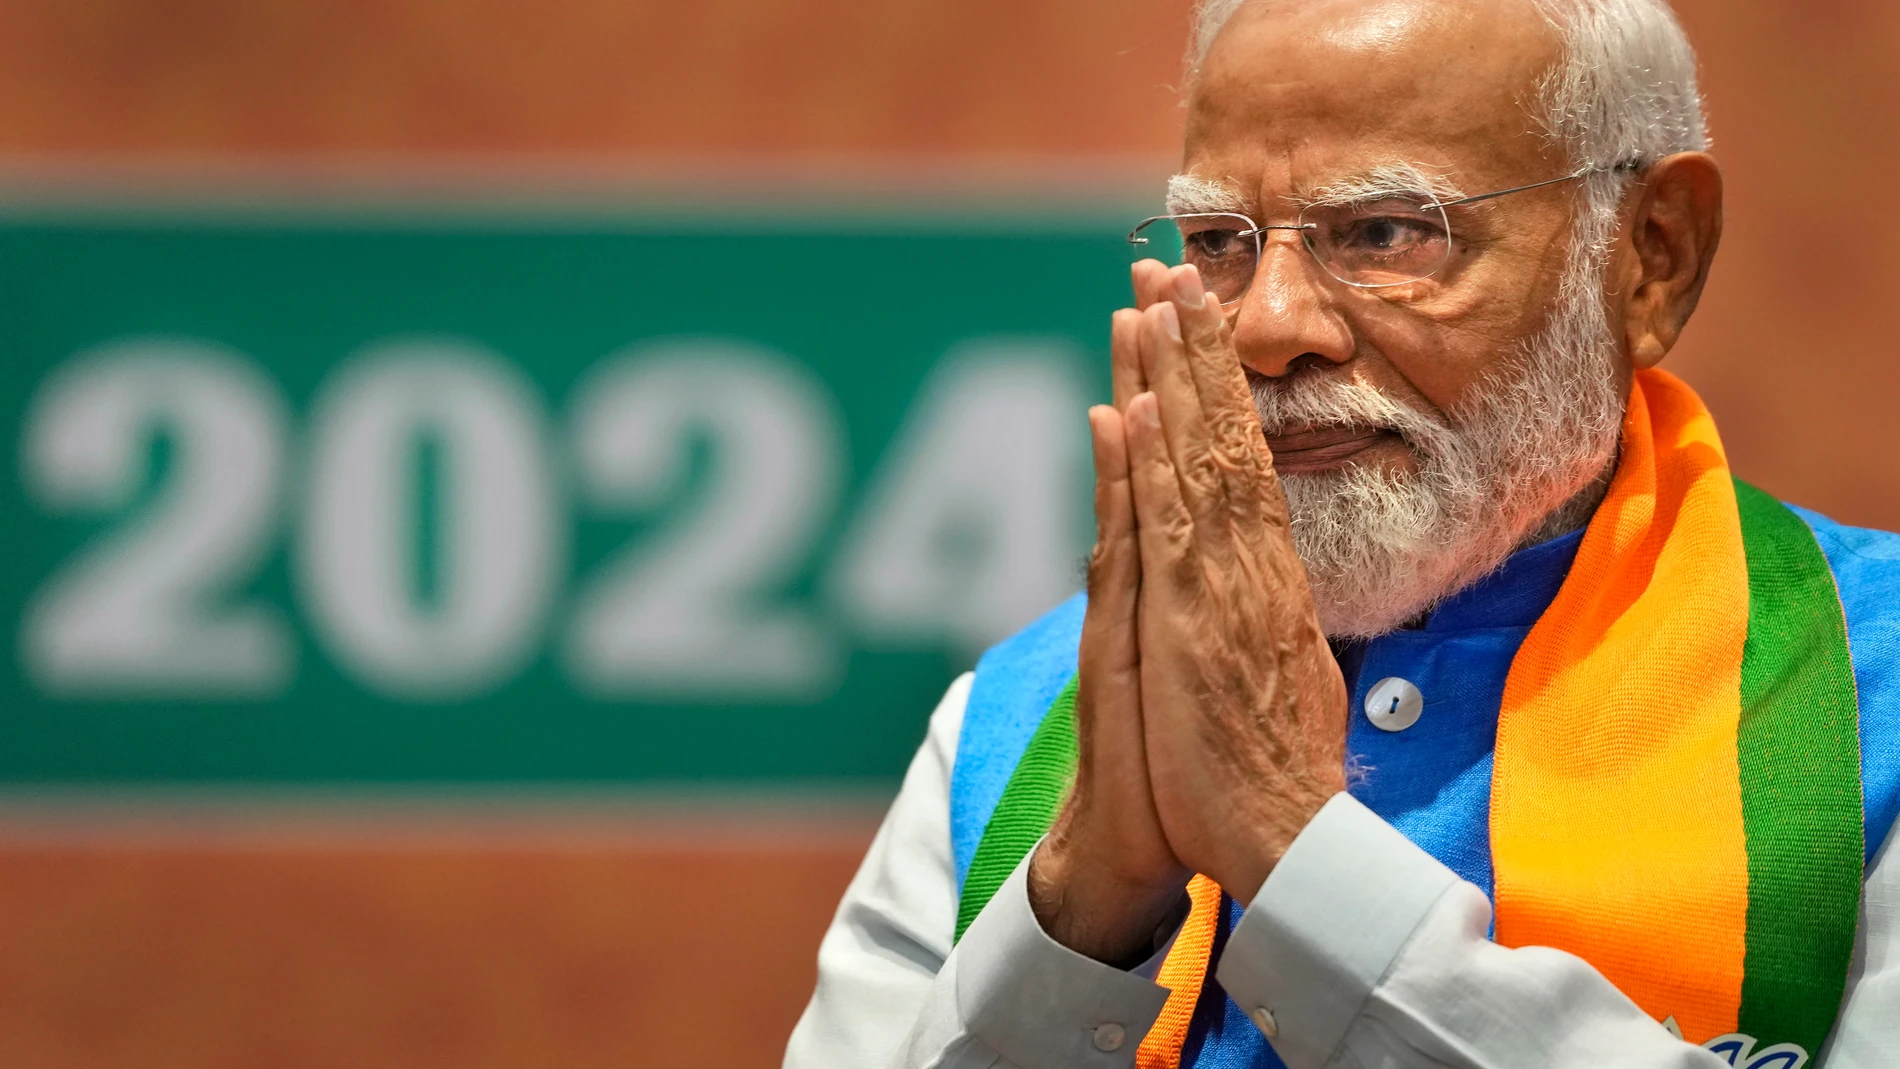 Indian Prime Minister Narendra Modi greets during the unveiling of his Hindu nationalist Bharatiya Janata party’s election manifesto in New Delhi, India, April 14, 2024. Modi is campaigning for a third term in the general election starting Friday. (AP Photo/Manish Swarup)